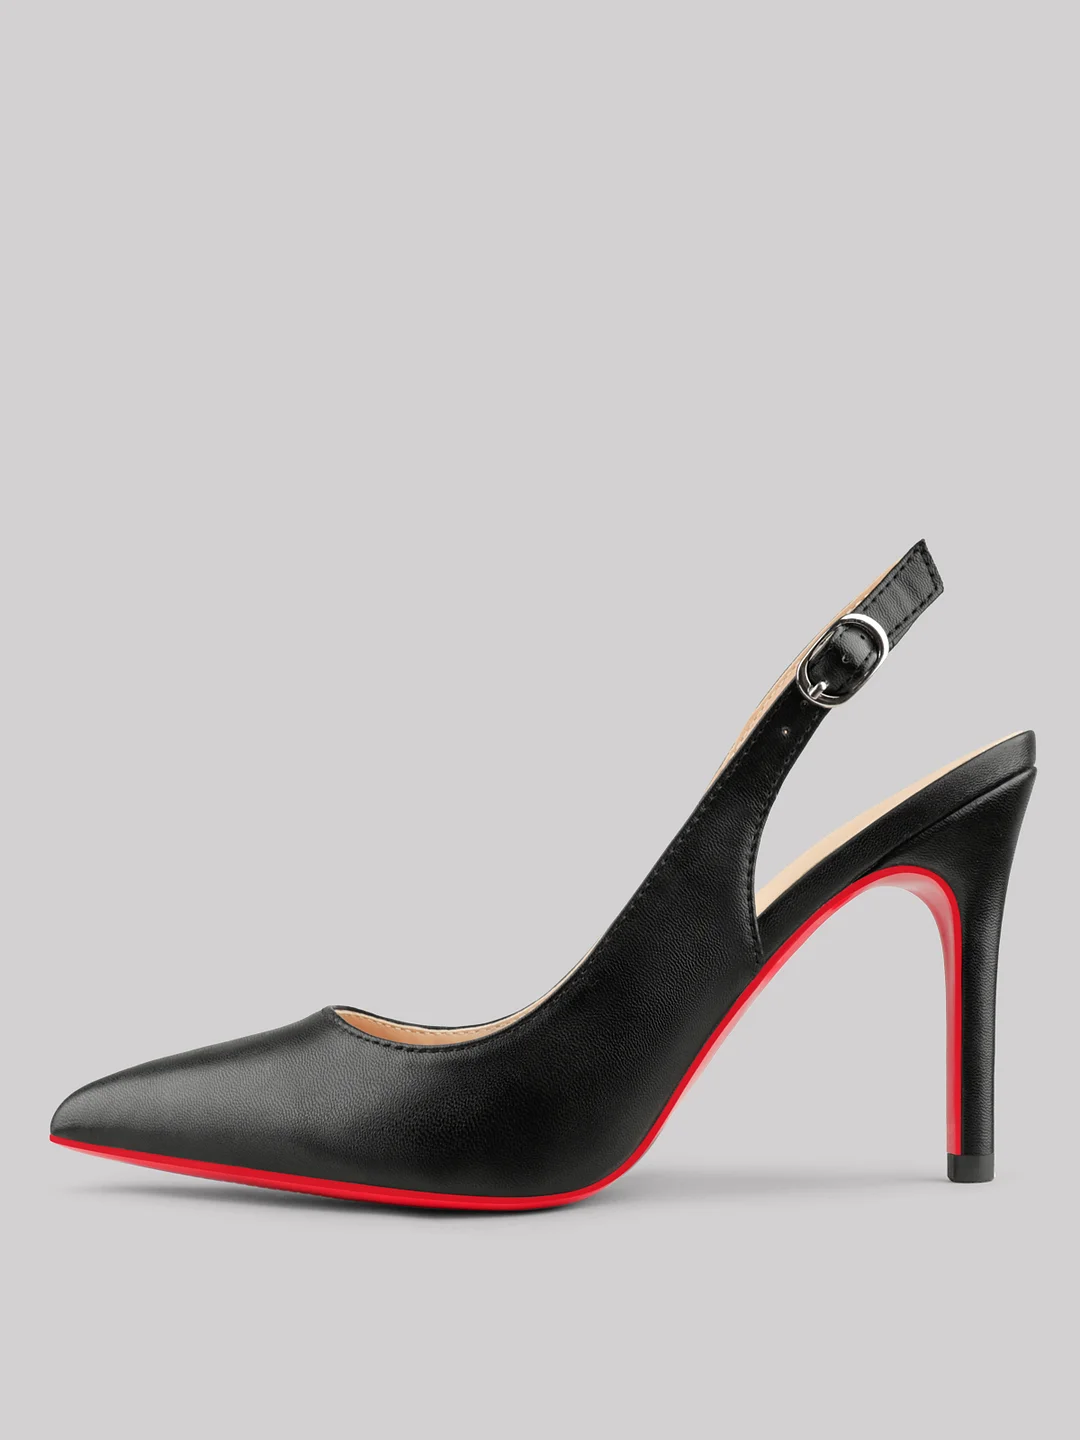 85mm Mid Heels for Women Slingback Pumps Sandals Pointy Toe Pumps Red Bottoms Shoes Matte Heels